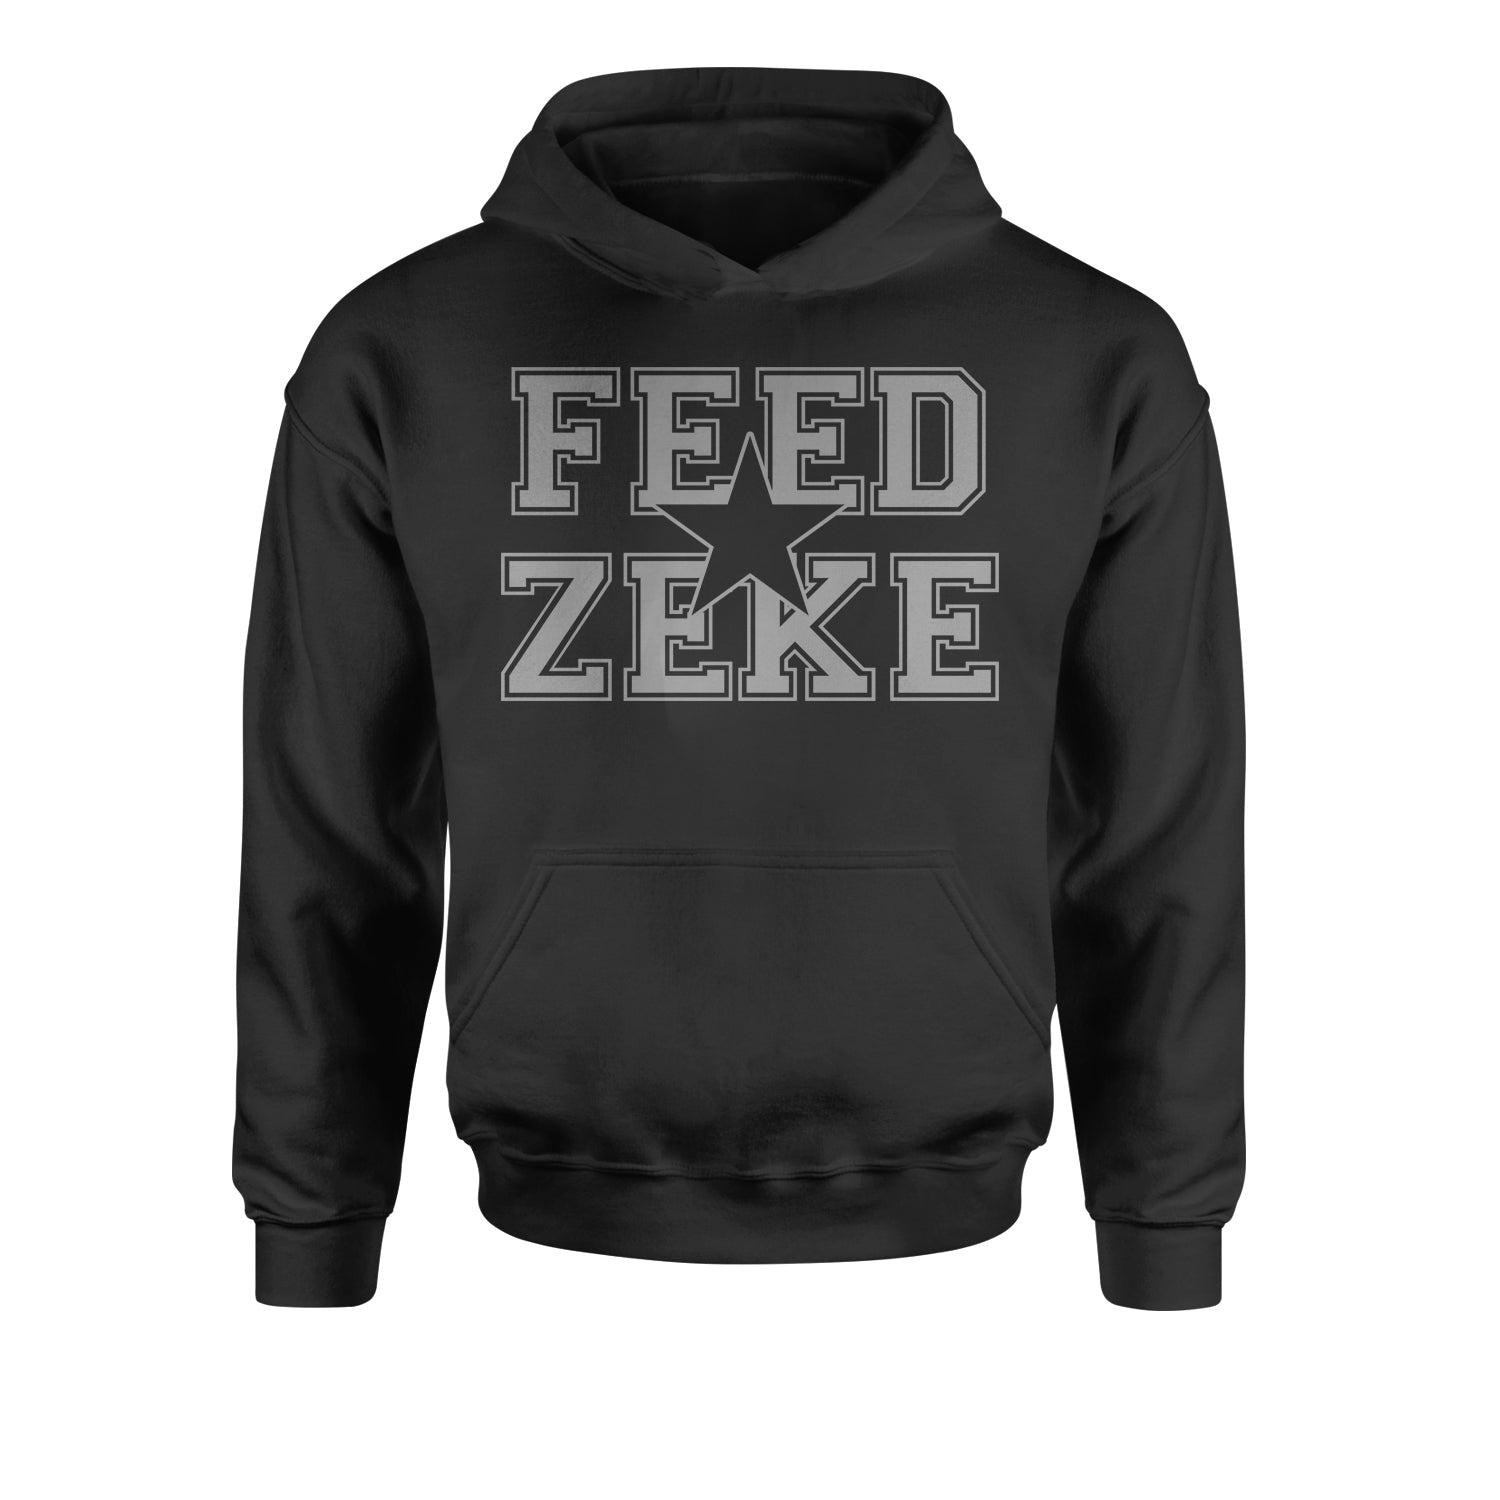 Feed Zeke Youth-Sized Hoodie #expressiontees by Expression Tees